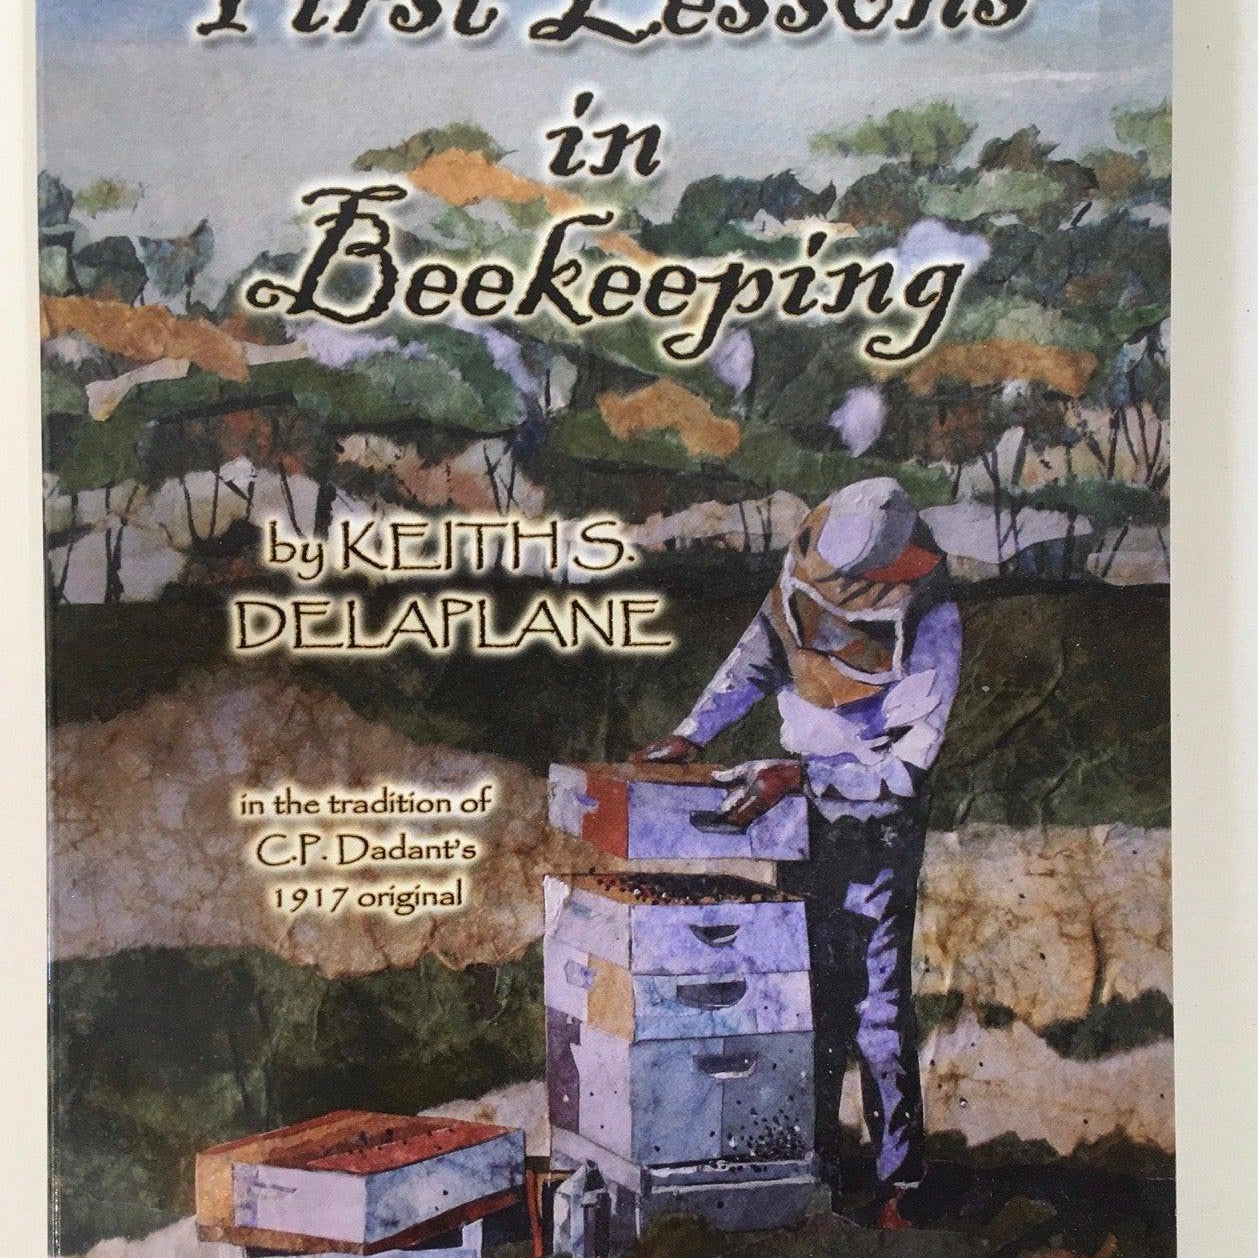 First Lessons in Beekeeping Book, by Keith Delaplane